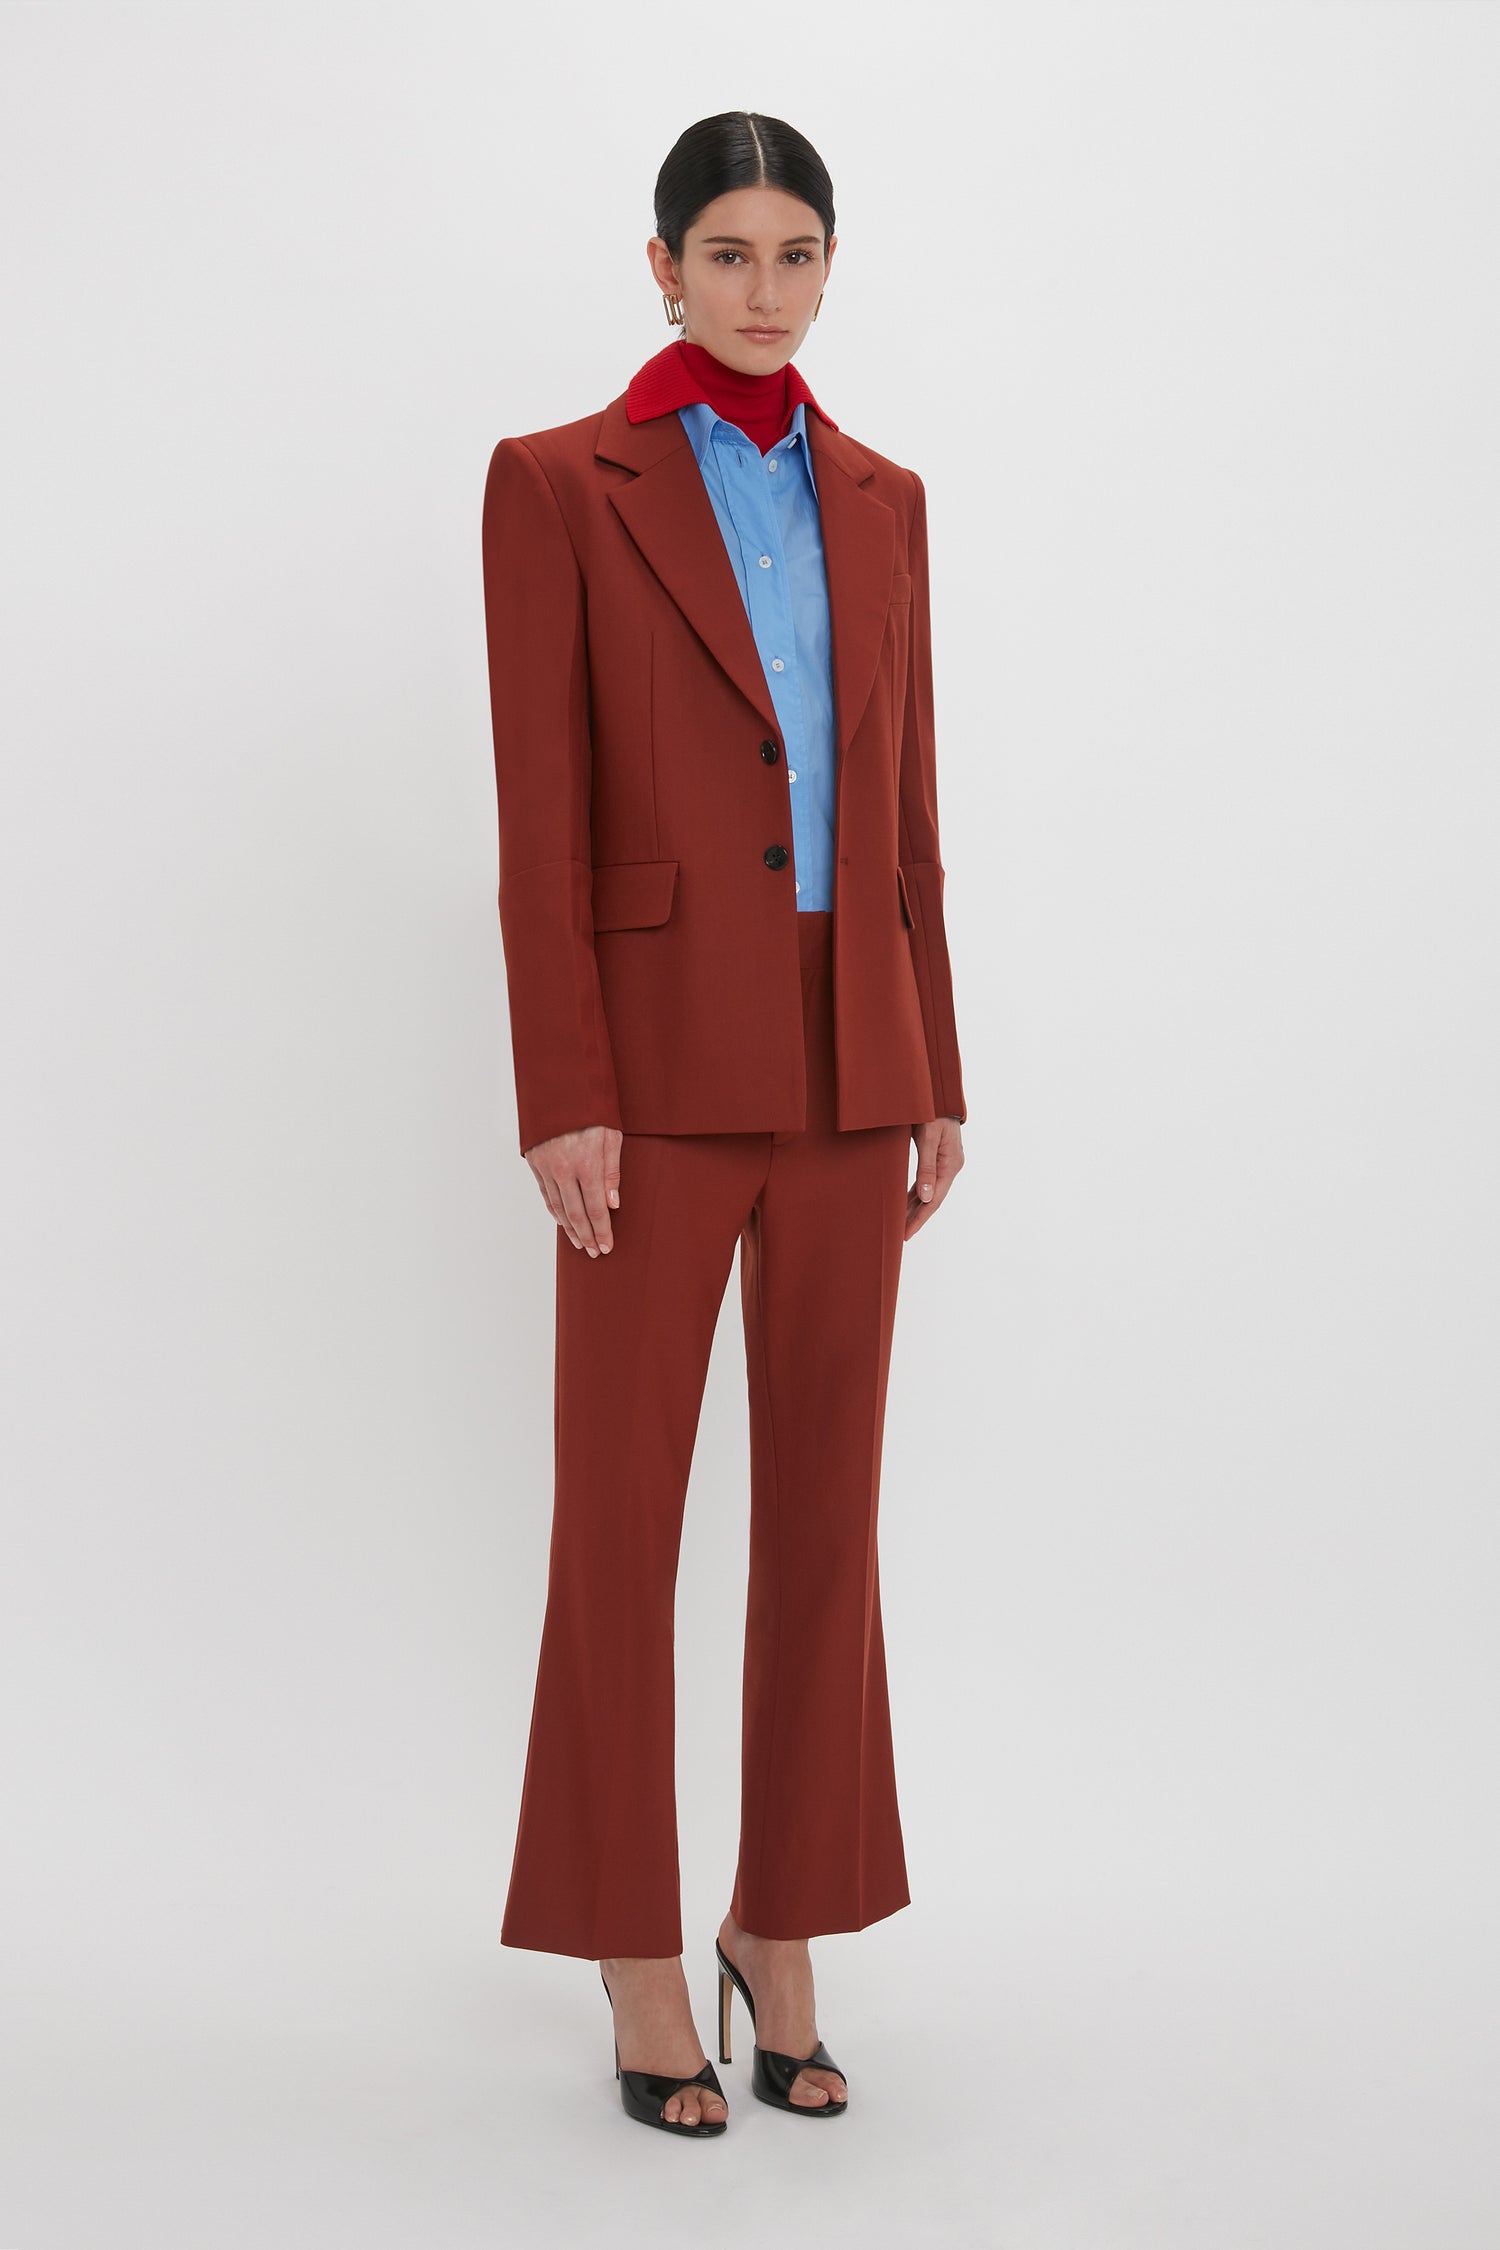 Person standing against a white background, wearing a Victoria Beckham Sleeve Detail Patch Pocket Jacket In Russet over a blue shirt and red scarf, paired with black high-heeled shoes. The outfit merges contemporary detailing seamlessly.